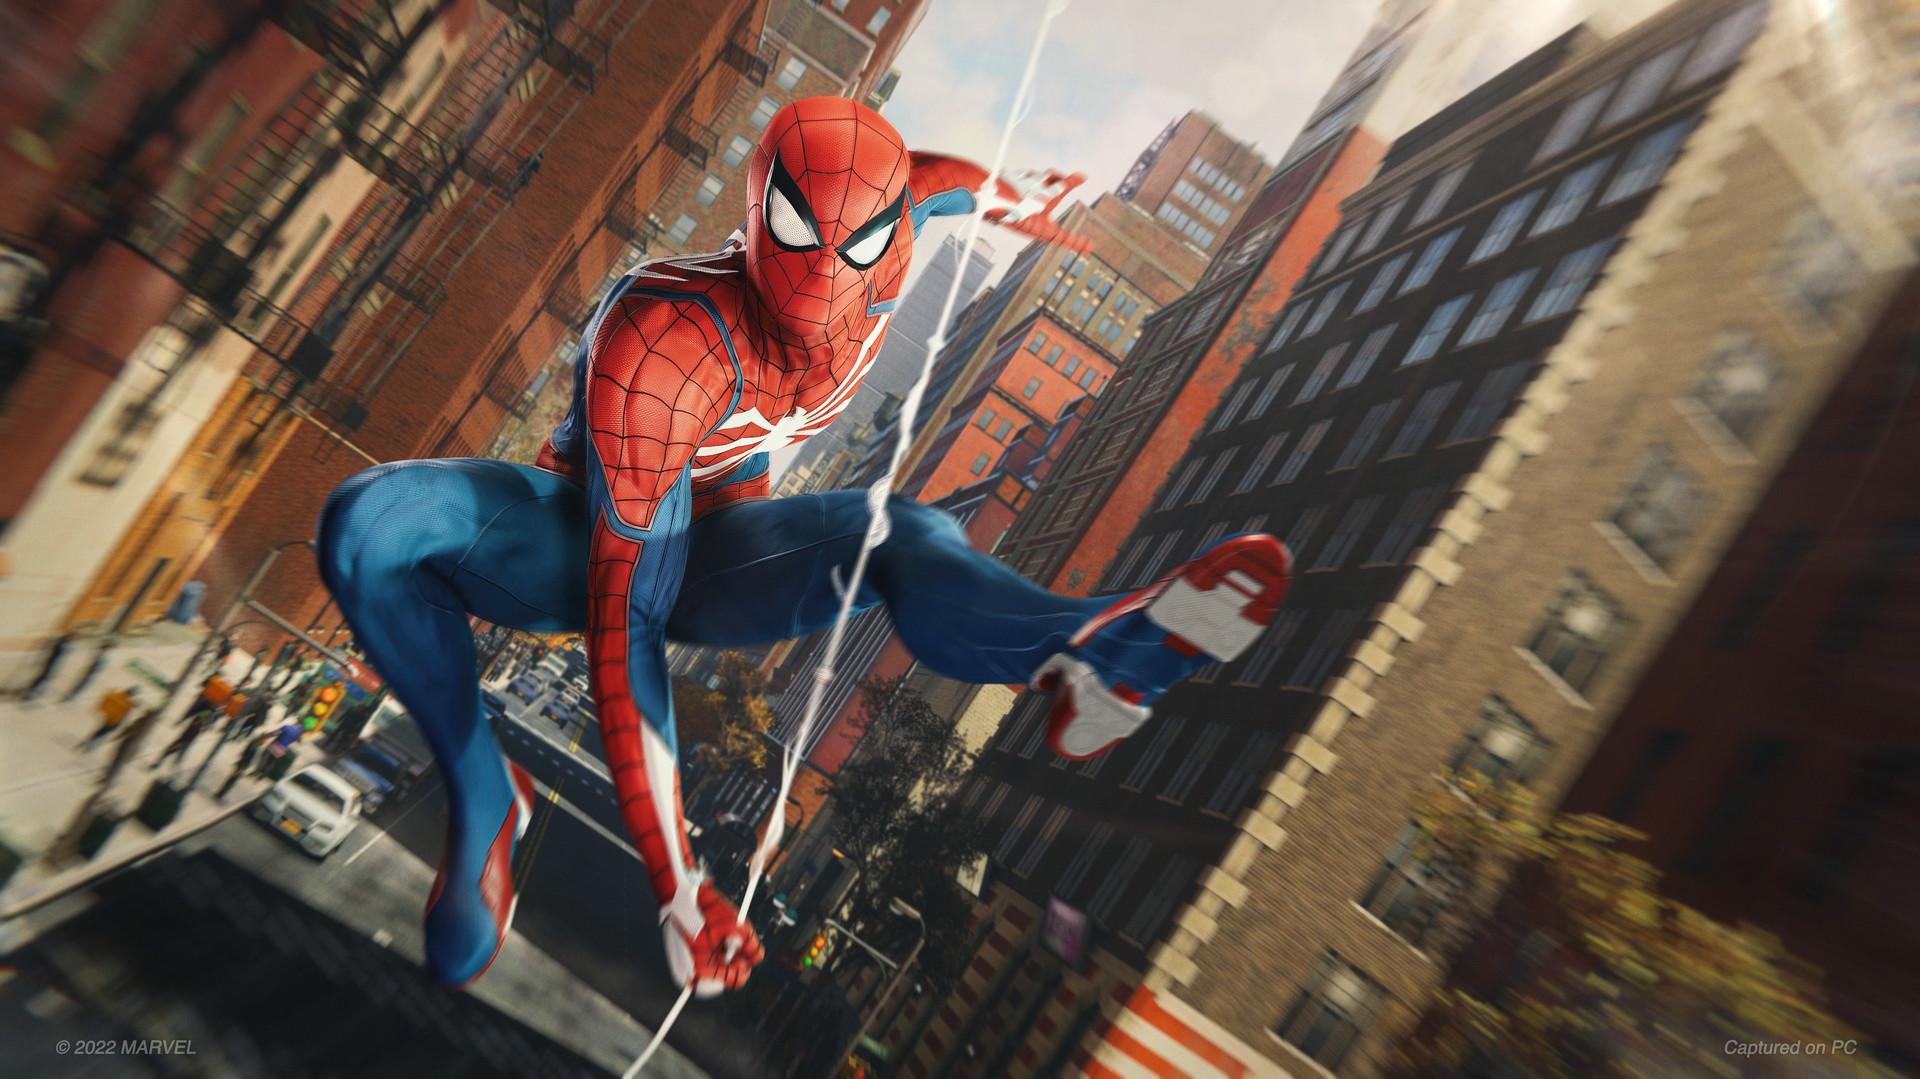 Marvel S Spider Man Remastered Is Now Available For Pc After Its